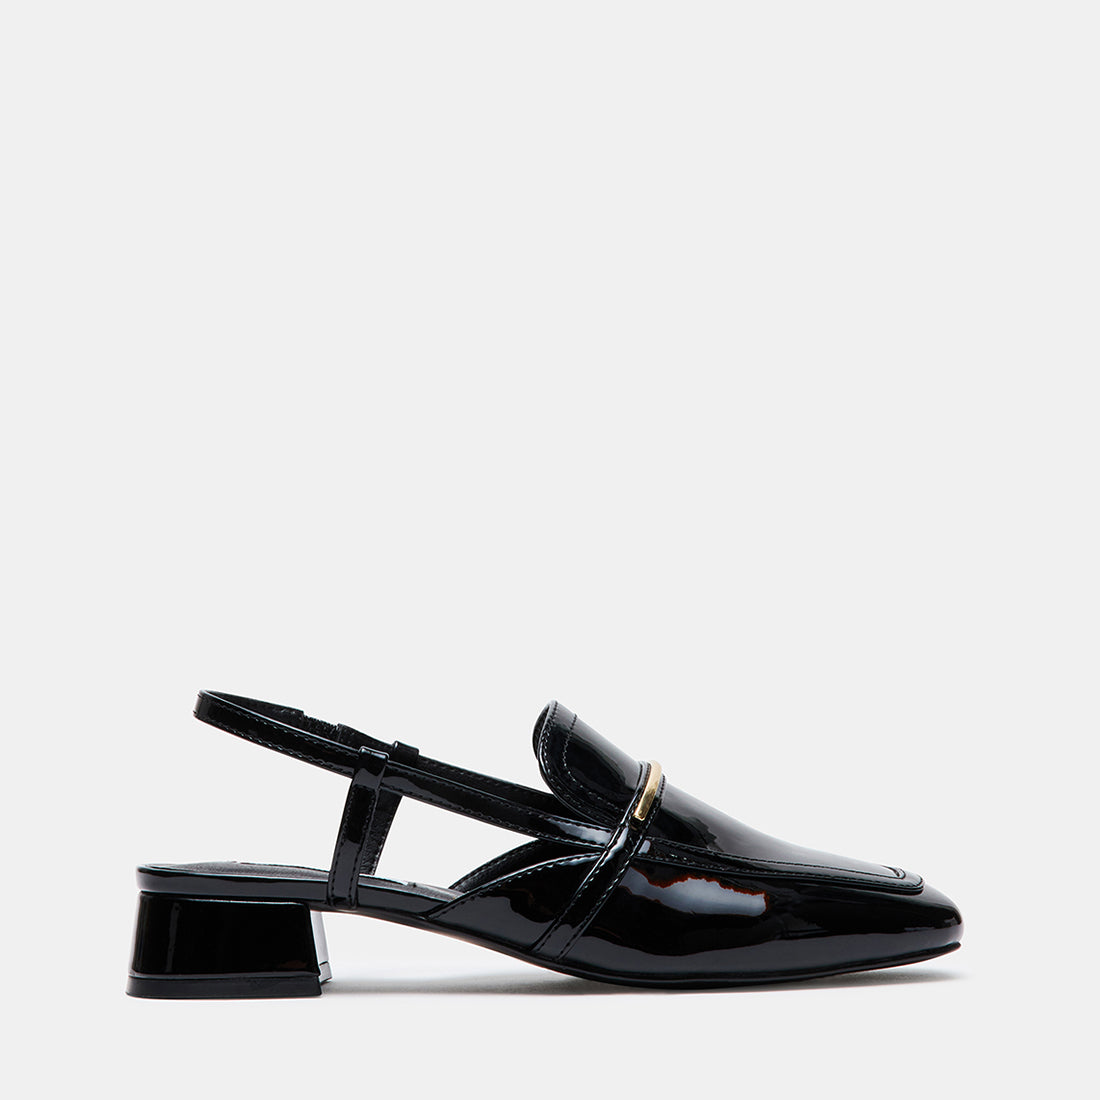 Black Patent Leather - Weaver Leather Supply